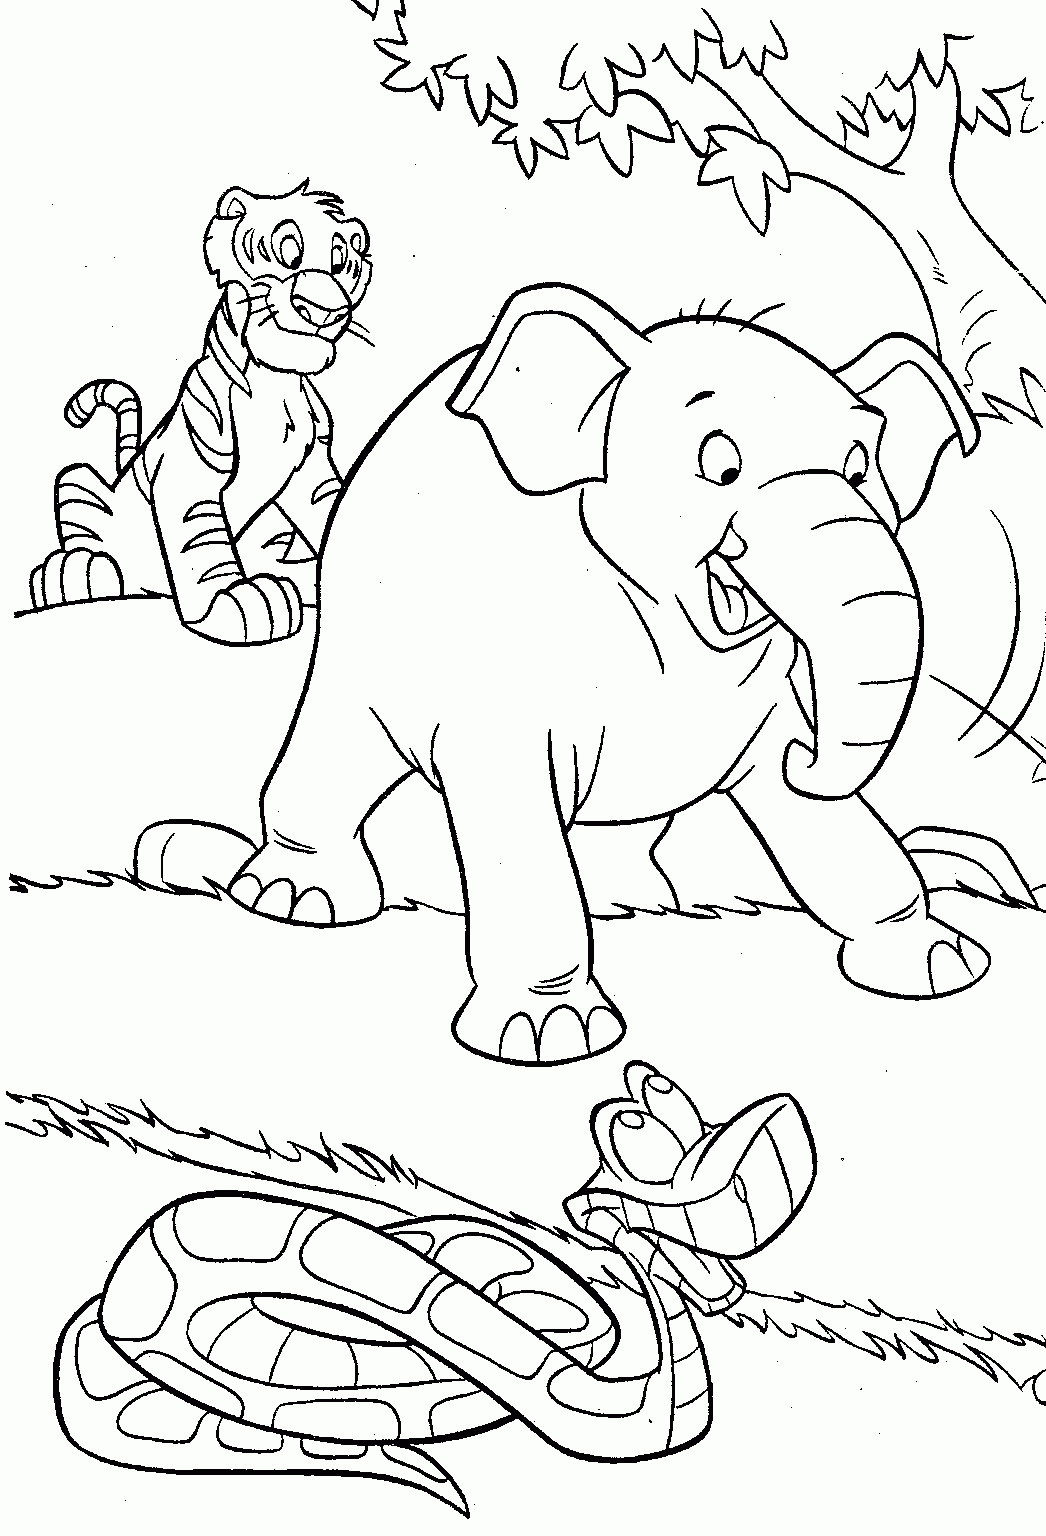 Zoo Scene Coloring Pages   Coloring Home